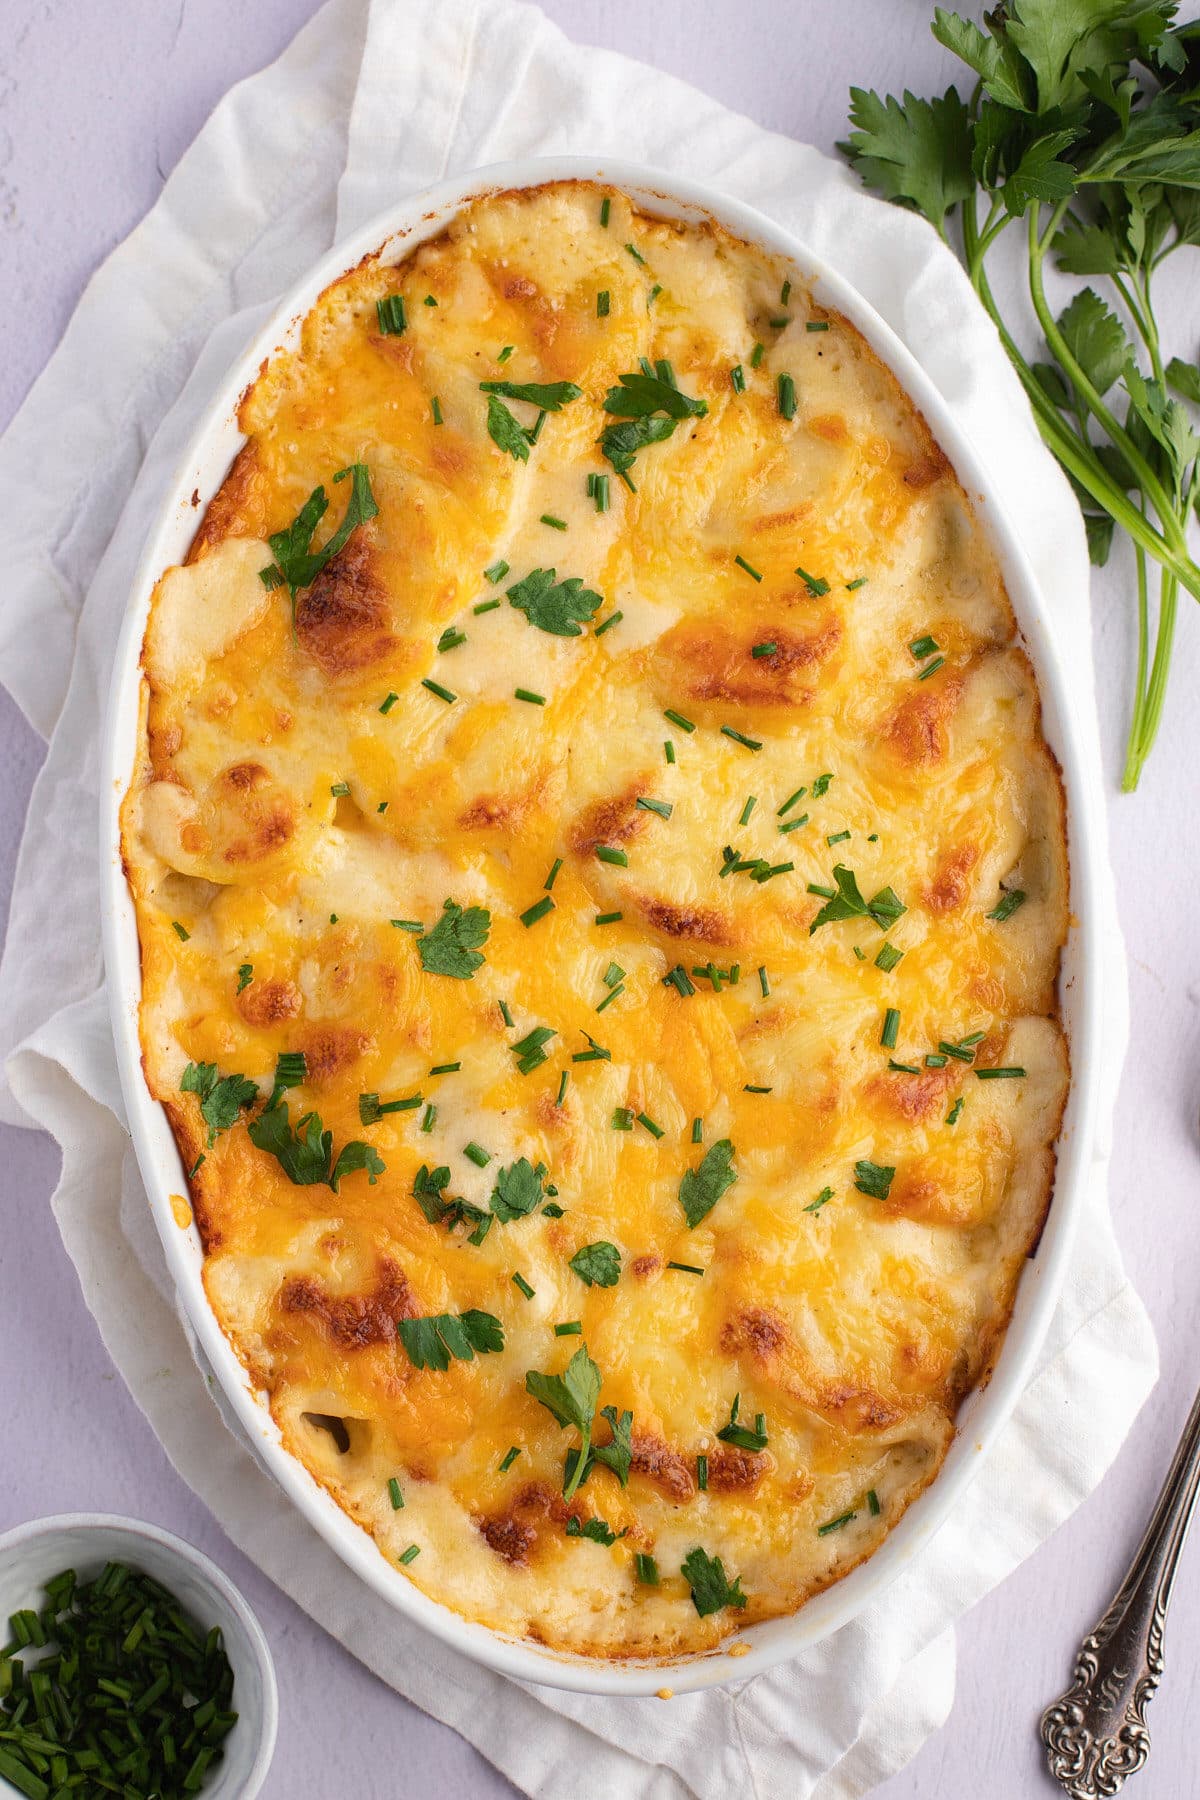 Cheesy scalloped potatoes in a white dish garnished with fresh herbs.